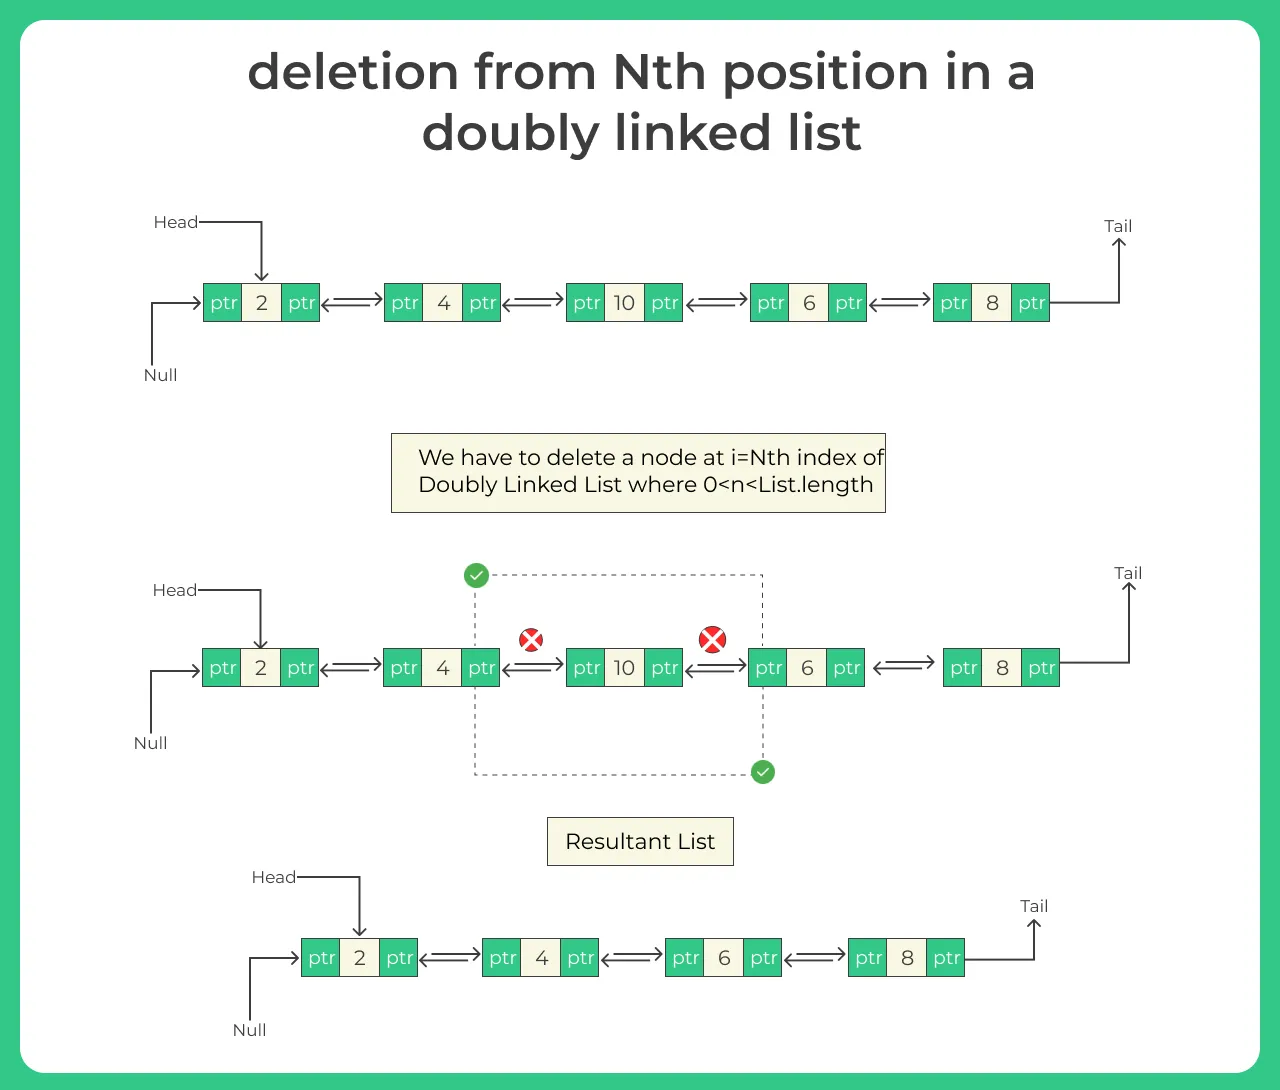 Deletion from Nth position in a doubly linked list